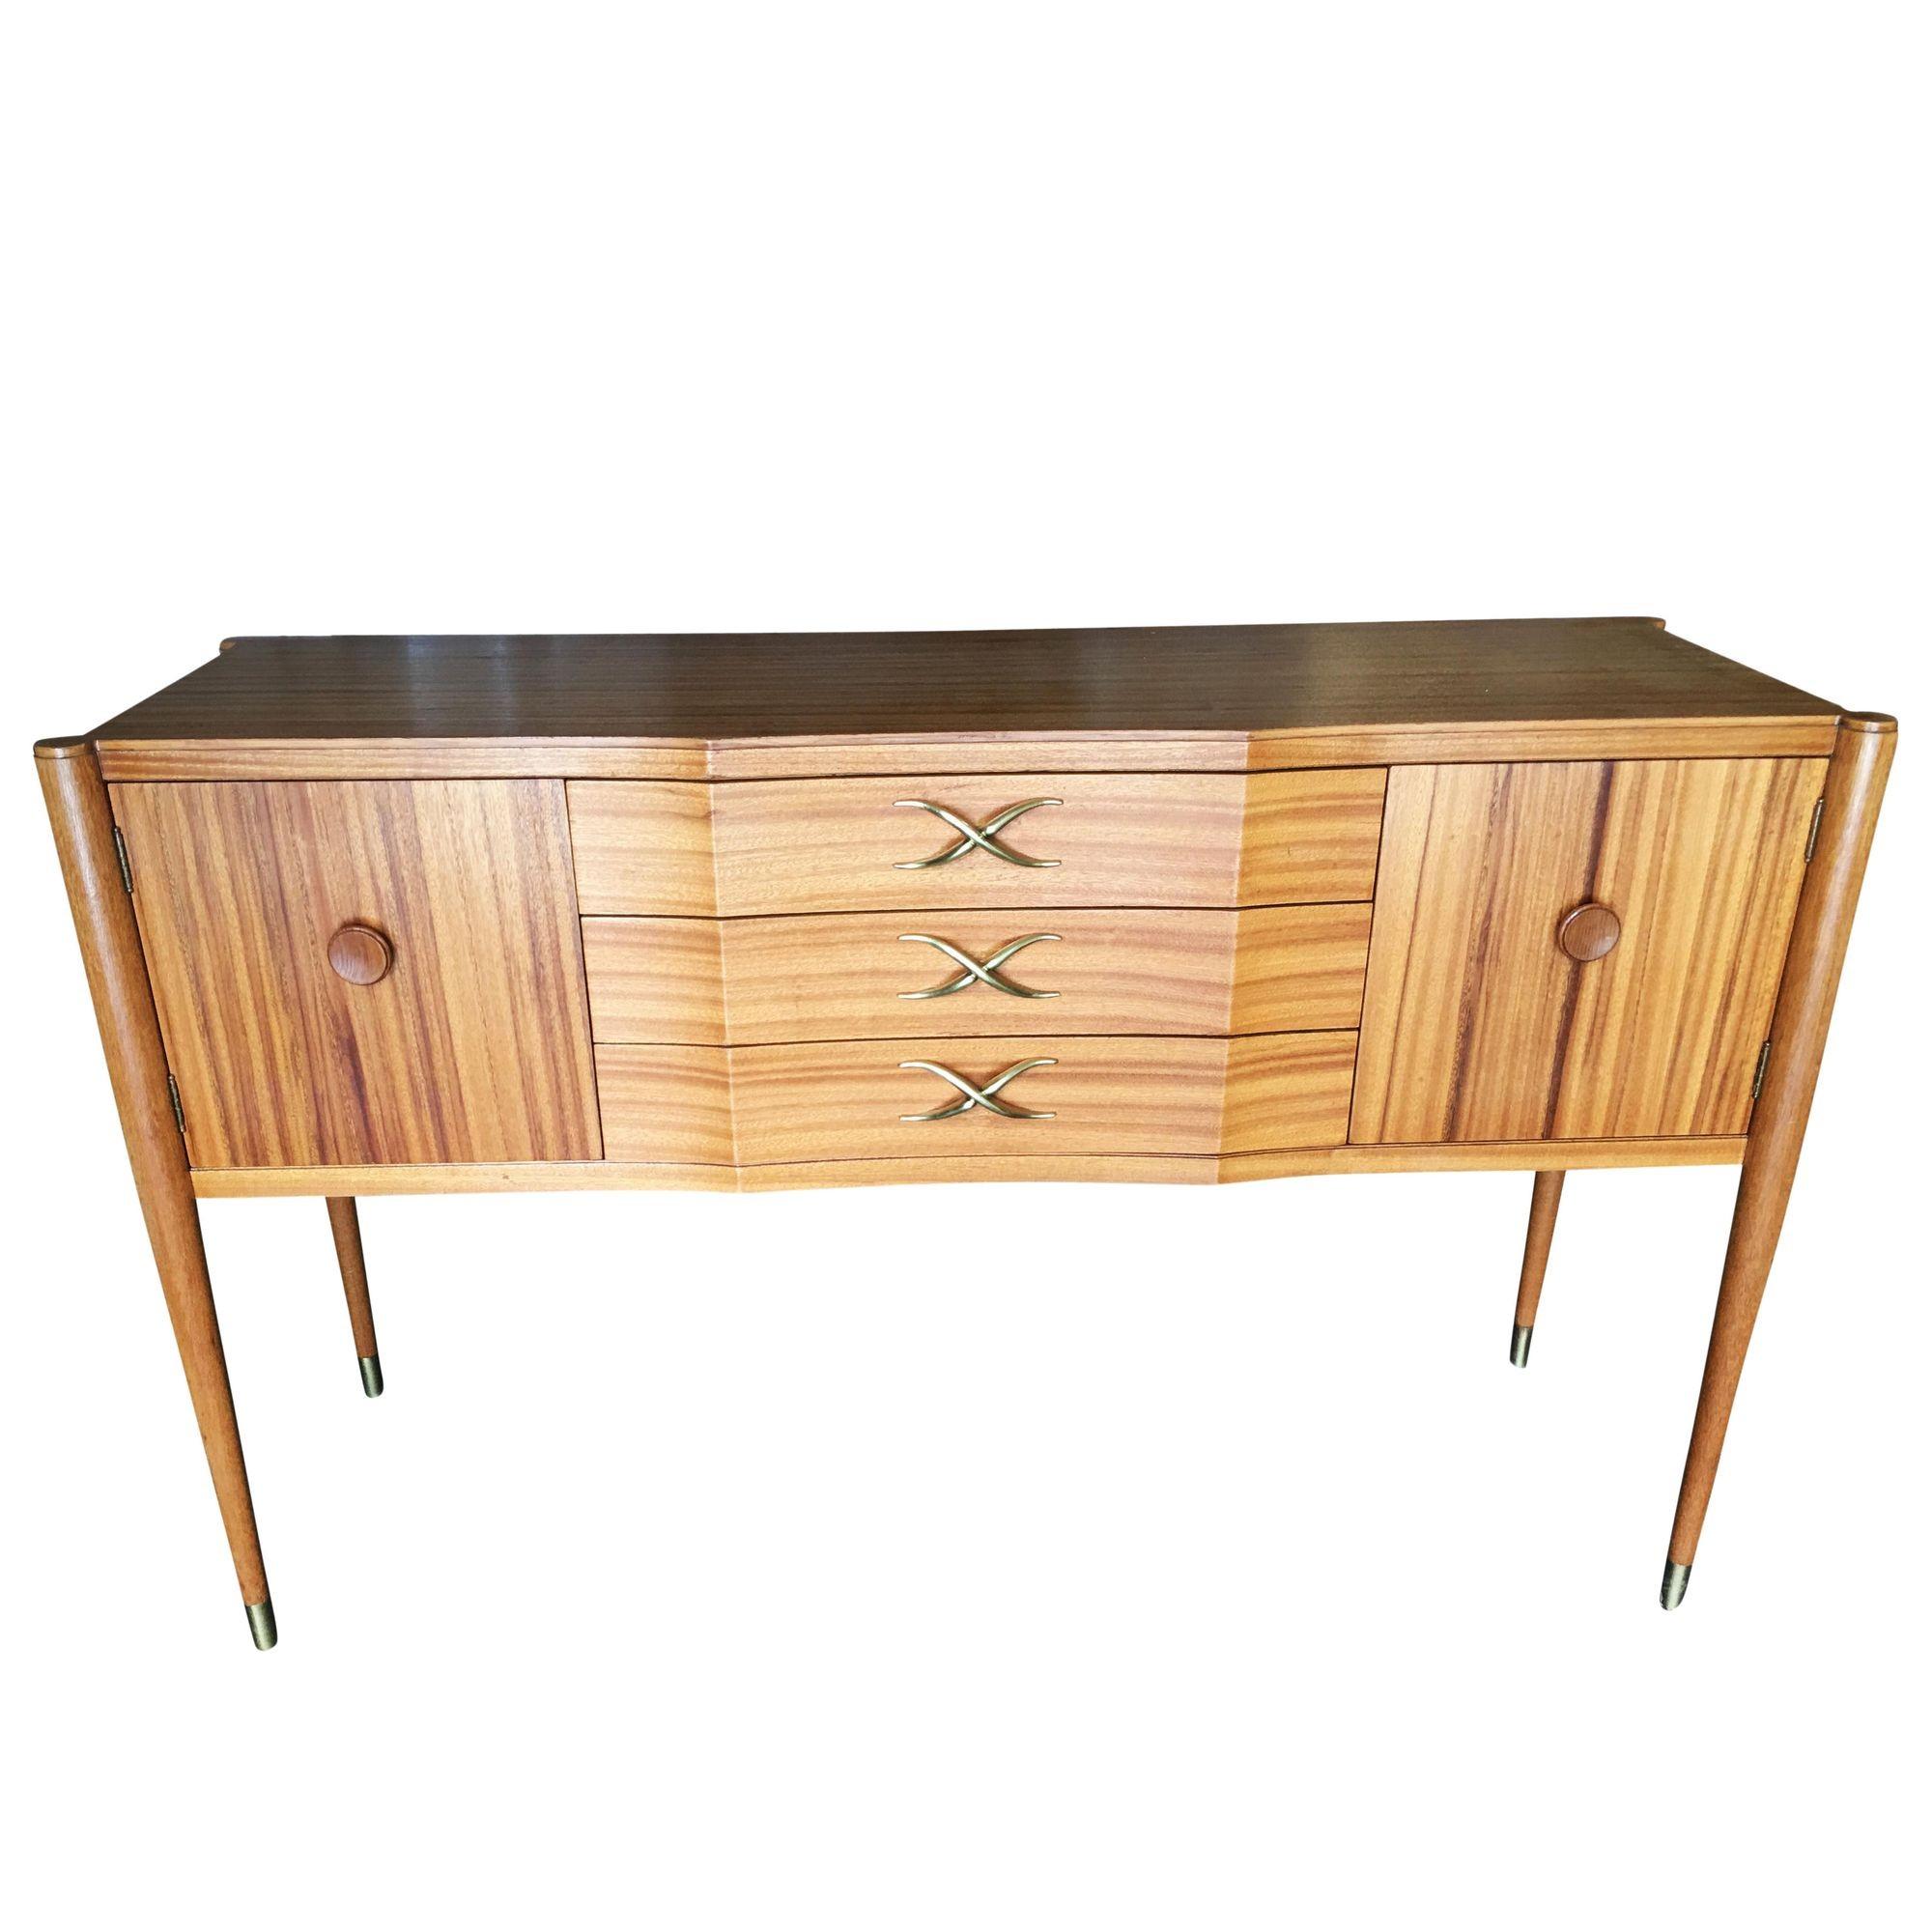 Midcentury mahogany sideboard by Paul Frankl featuring a slender cabinet on petite taper legs with 3 drawers and 2 front opening cabinets. This sideboard features the signature Frankl 